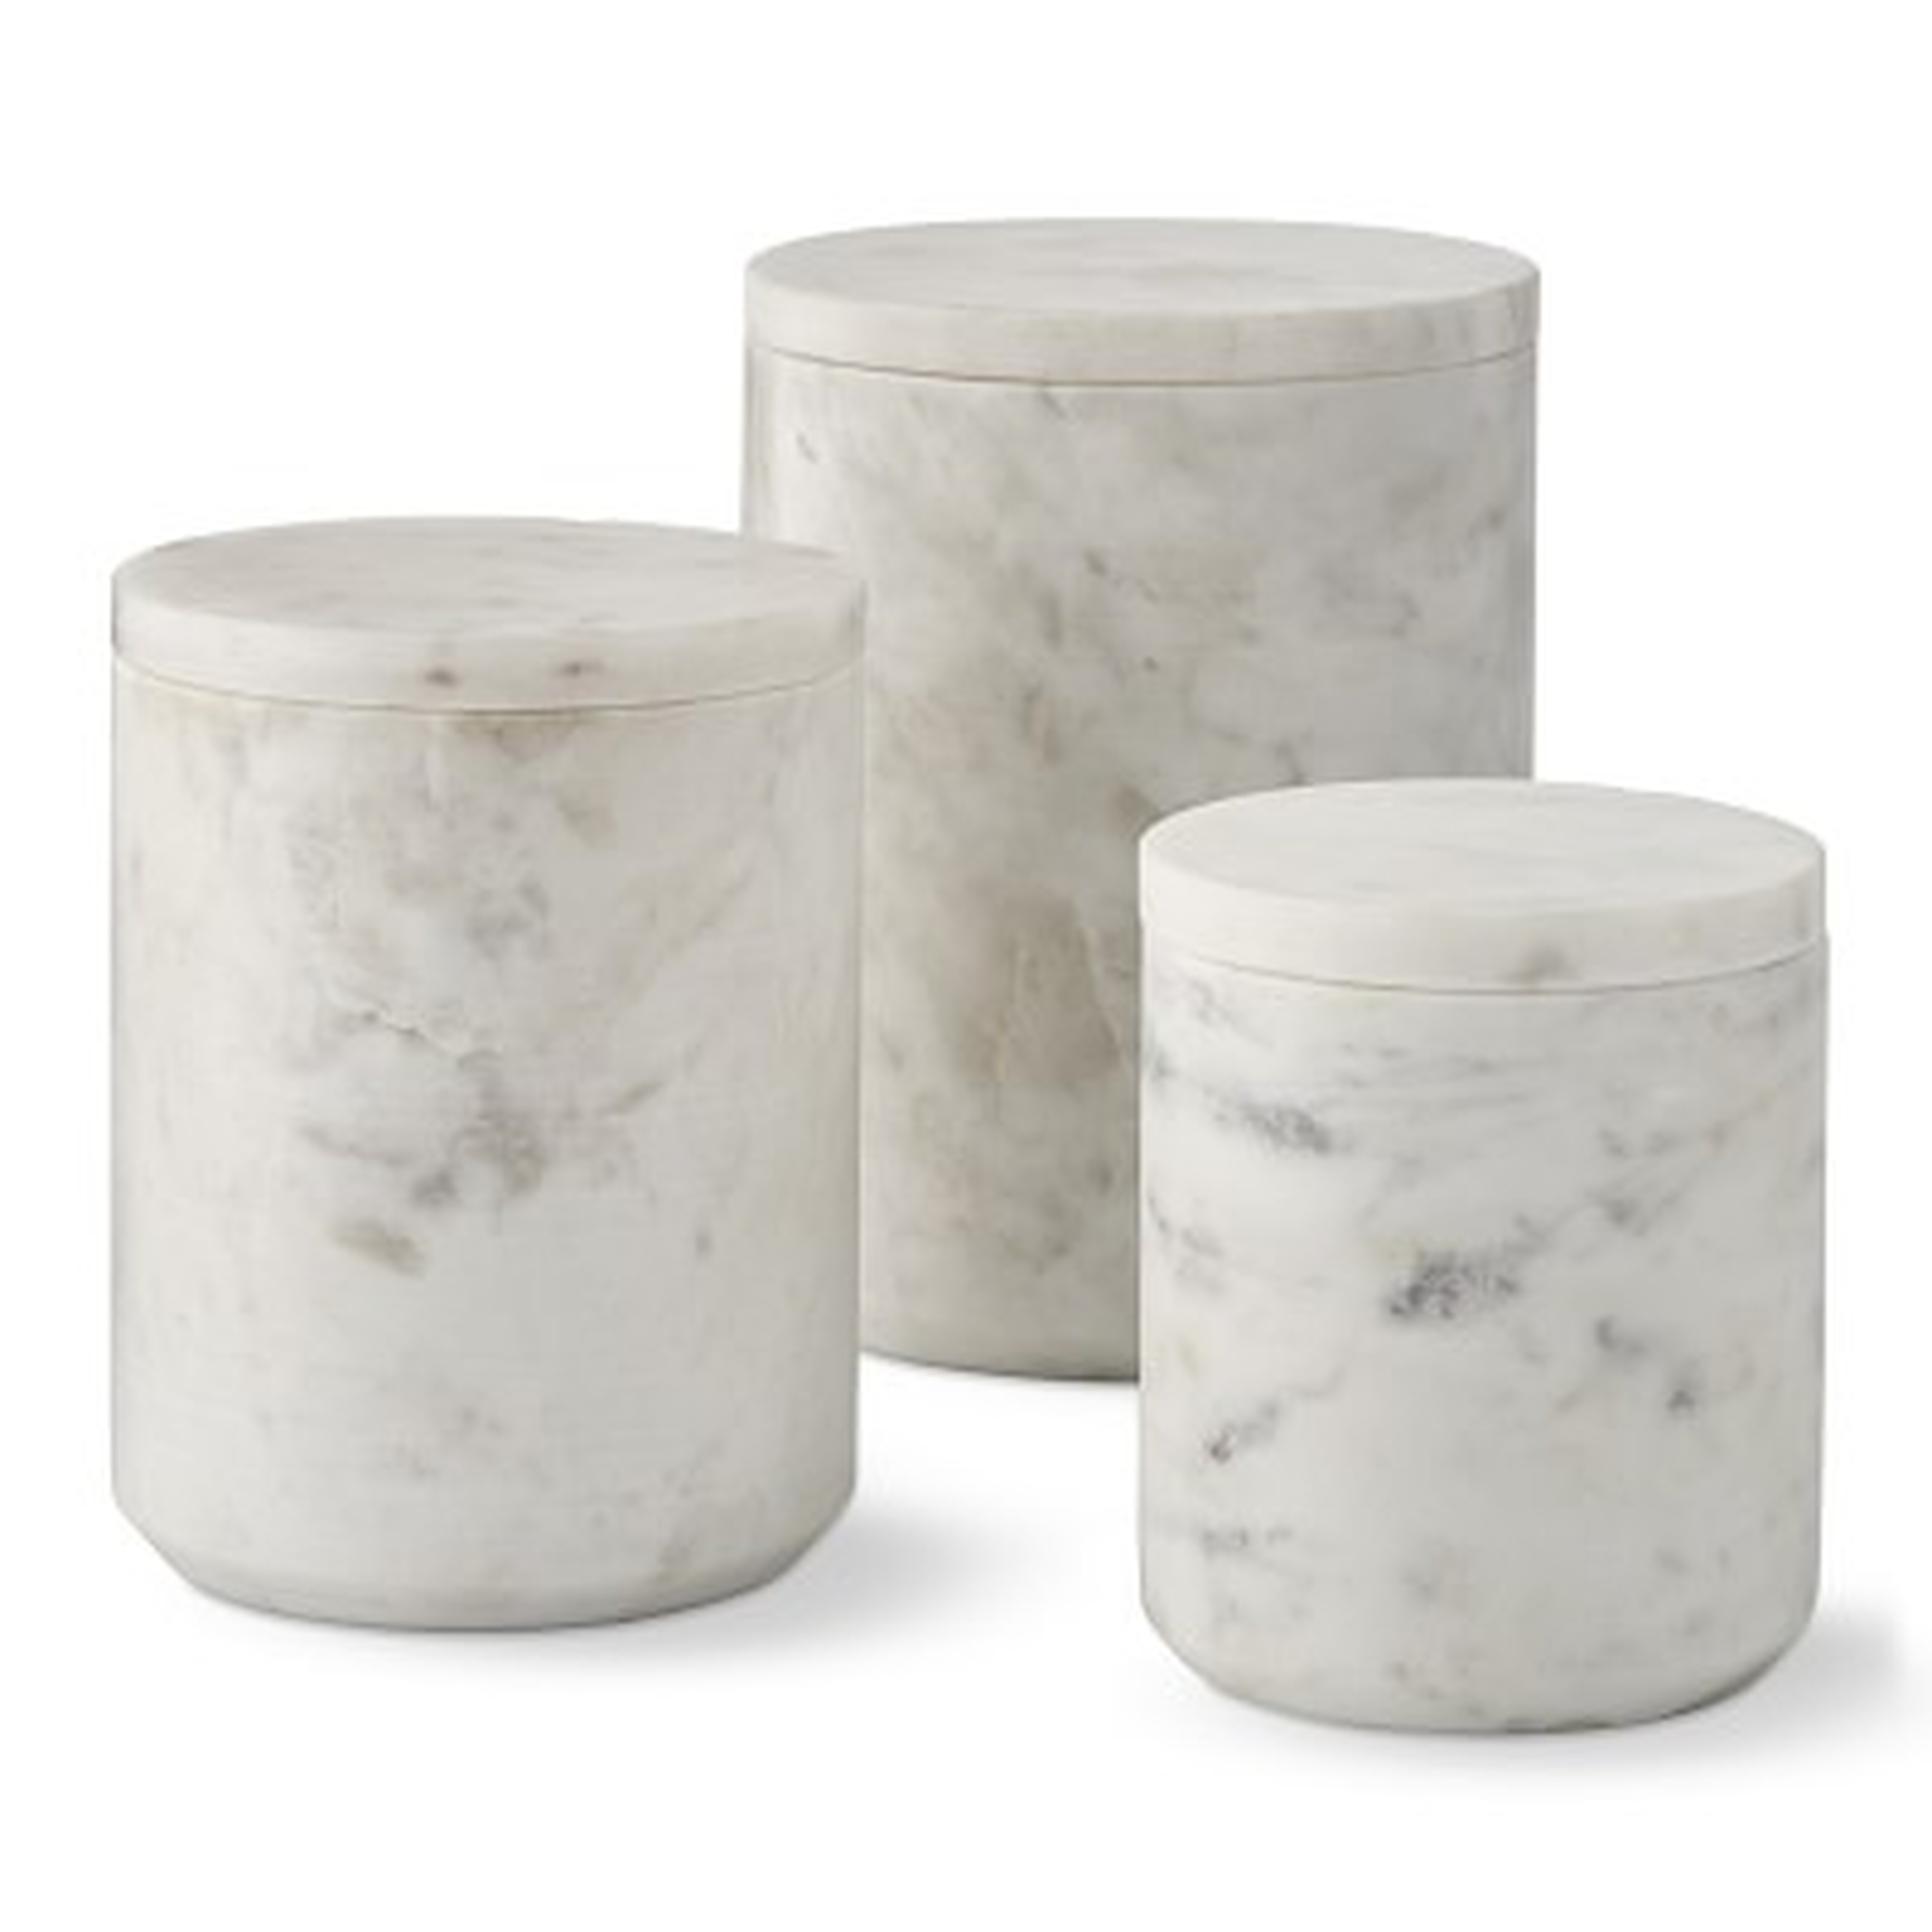 Marble Canisters, Set of 3 - Williams Sonoma